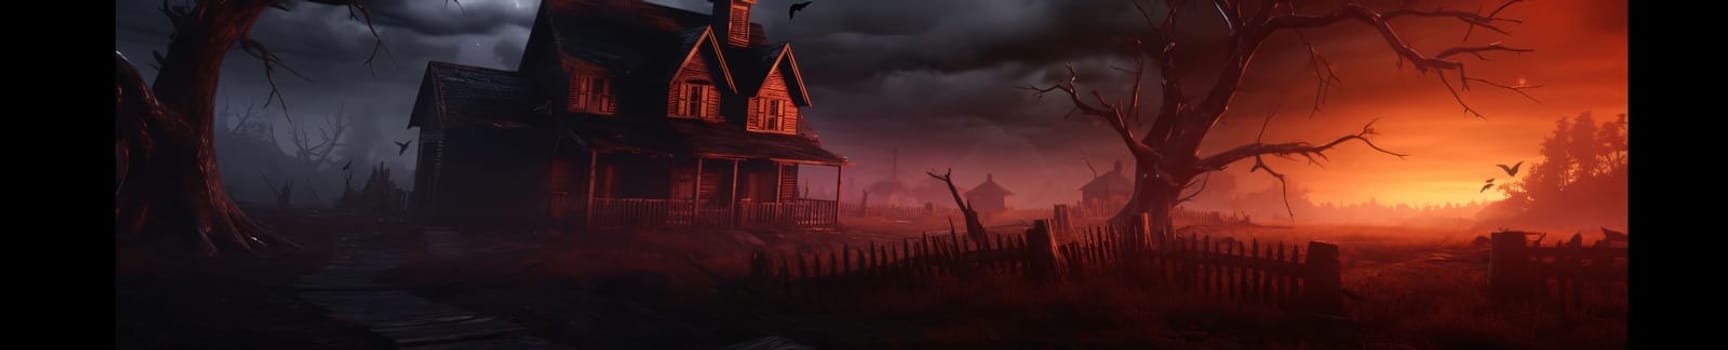 Banner: Halloween night landscape with old wooden house and trees. Halloween background